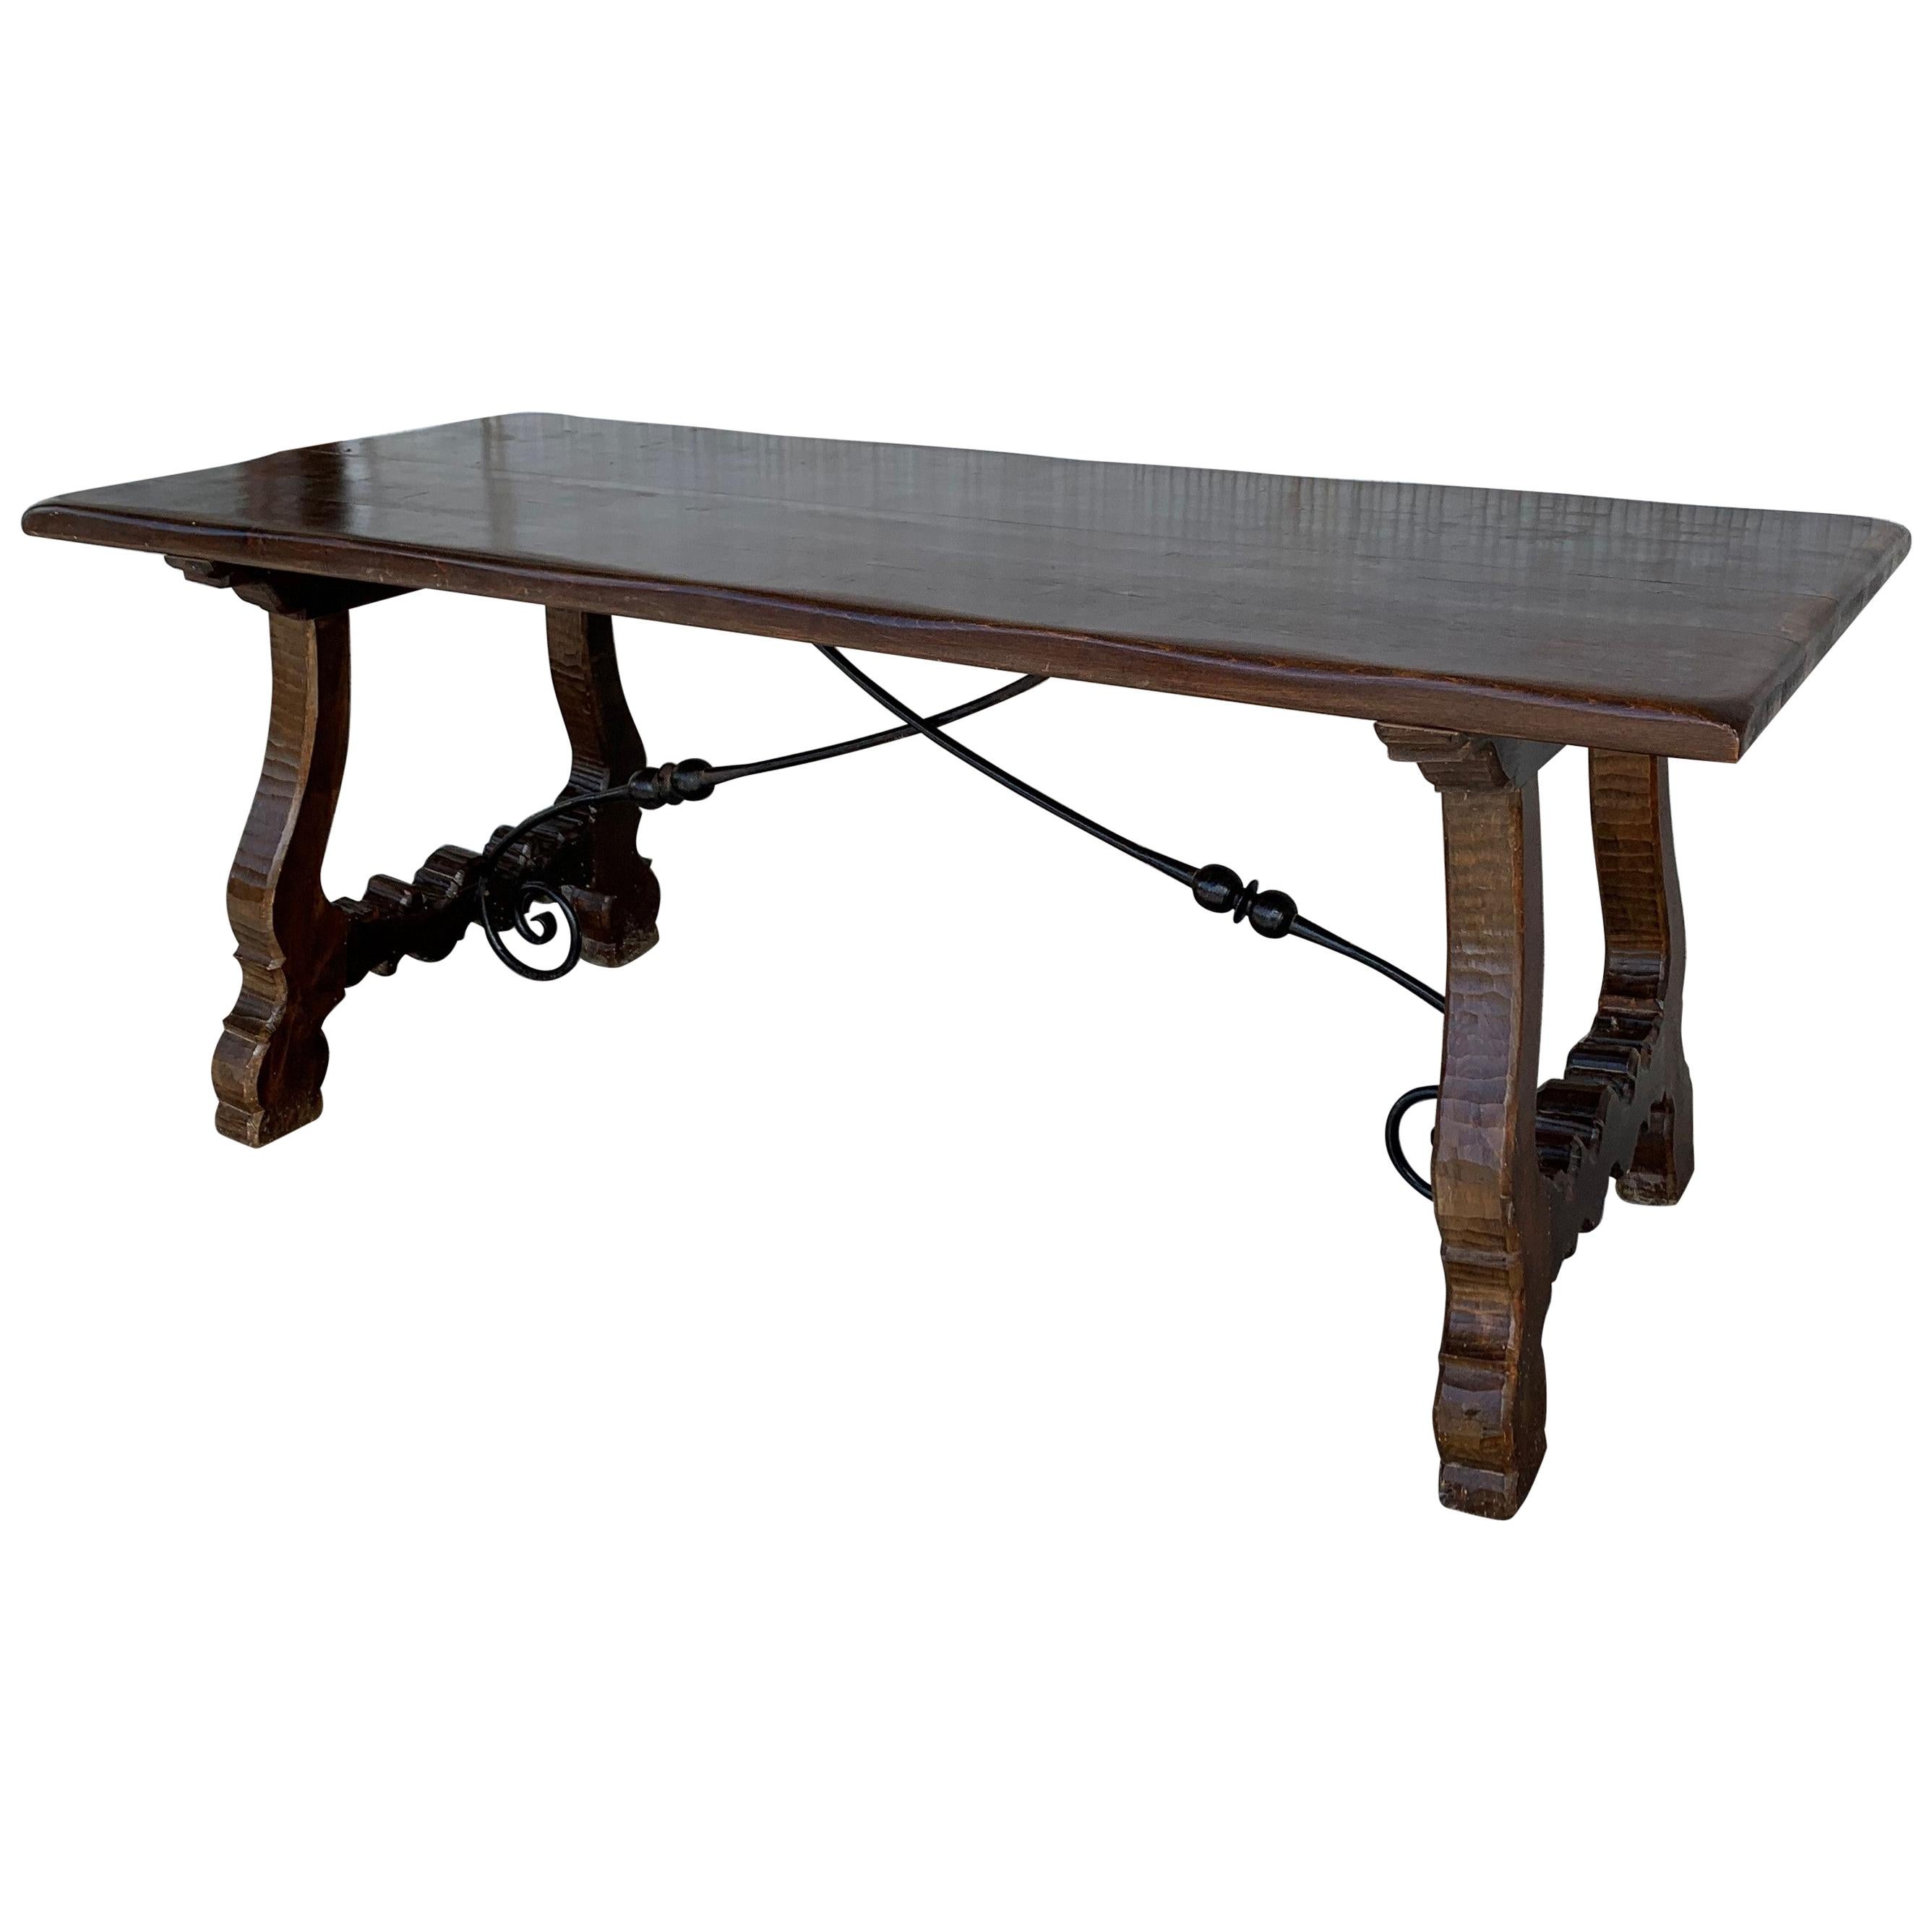 20th Century Refectory Spanish Table with Lyre Legs and Iron Stretch